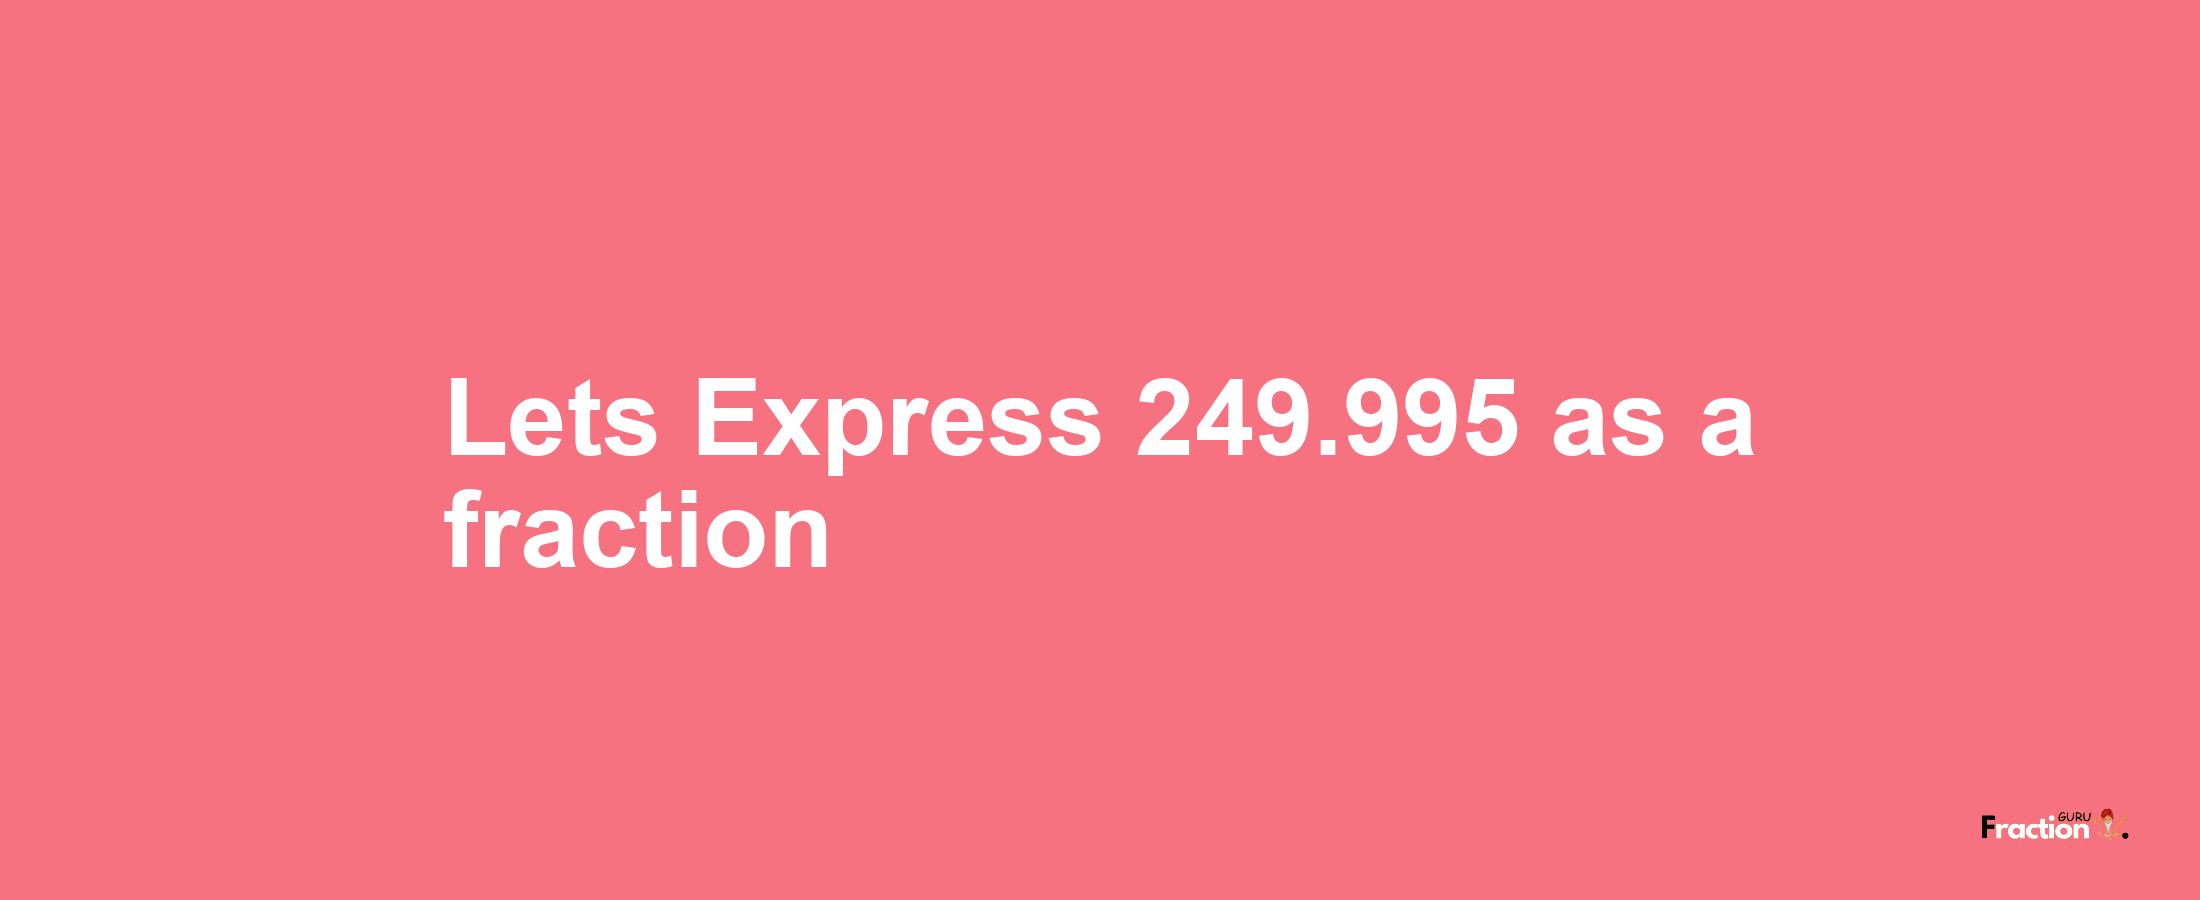 Lets Express 249.995 as afraction